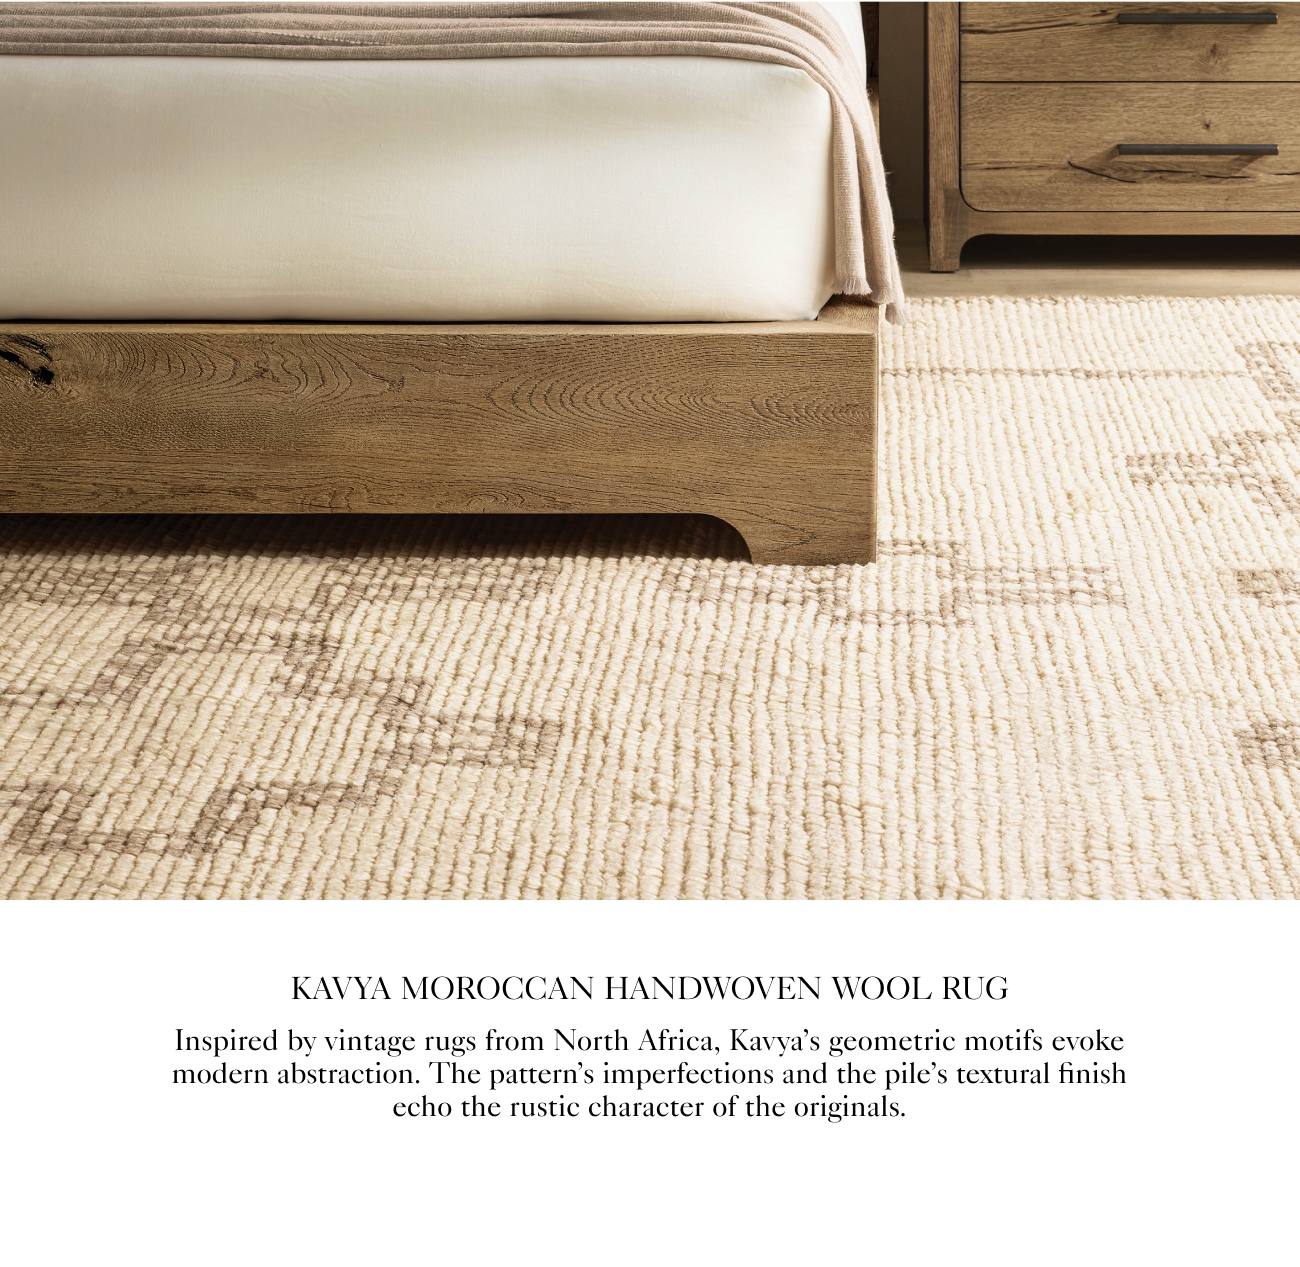  KAVYA MOROCCAN HANDWOVEN WOOL RUG Inspired by vintage rugs from North Africa, Kavyas geometric motifs evoke modern abstraction. The patterns imperfections and the piles textural finish ccho the rustic character of the originals. 